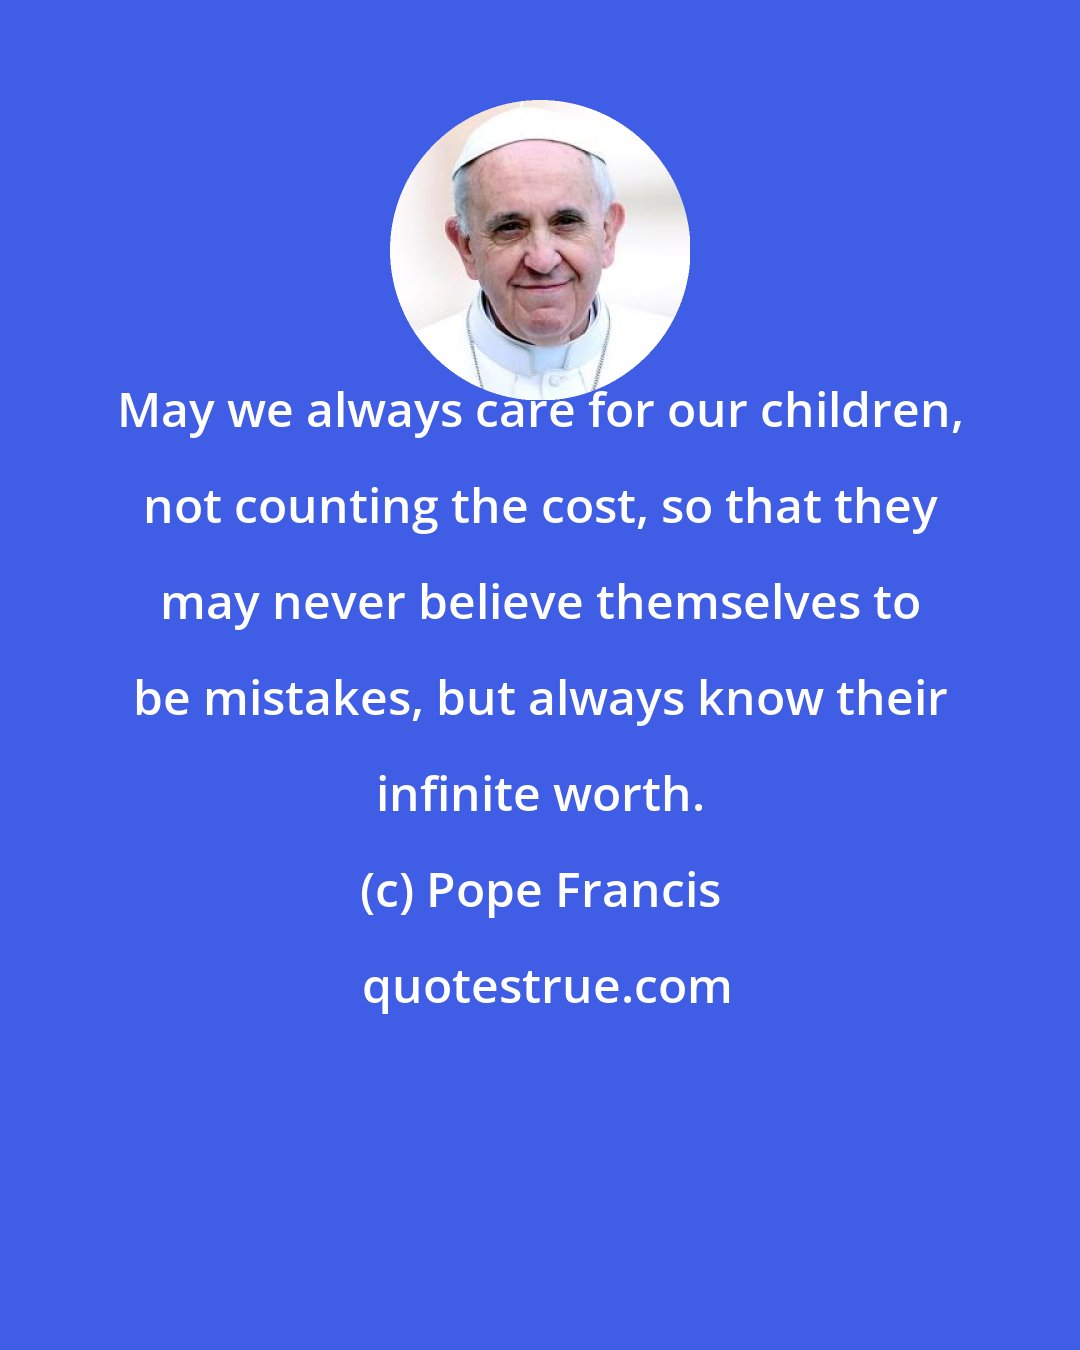 Pope Francis: May we always care for our children, not counting the cost, so that they may never believe themselves to be mistakes, but always know their infinite worth.